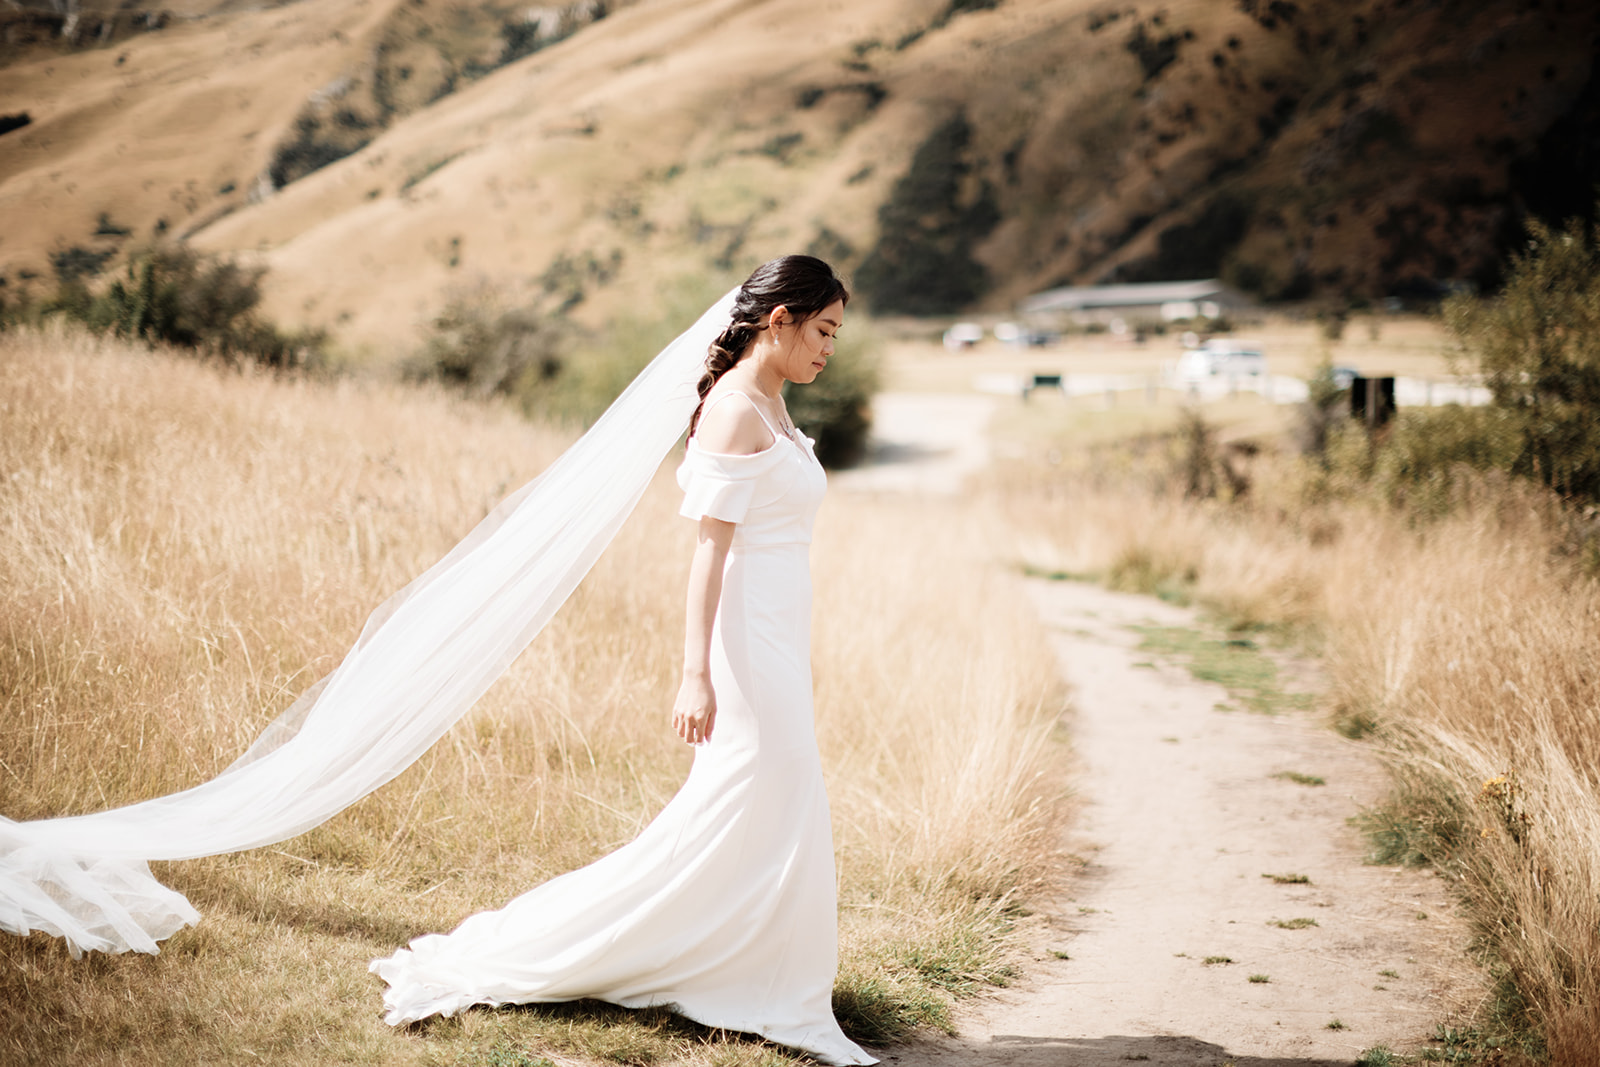 Keywords used: bride, veil, Queenstown Heli Pre Wedding at Cecil Peak

Bride adorned in a veil gracefully strolls through the picturesque Queenstown Heli Pre Wedding at Cecil Peak.